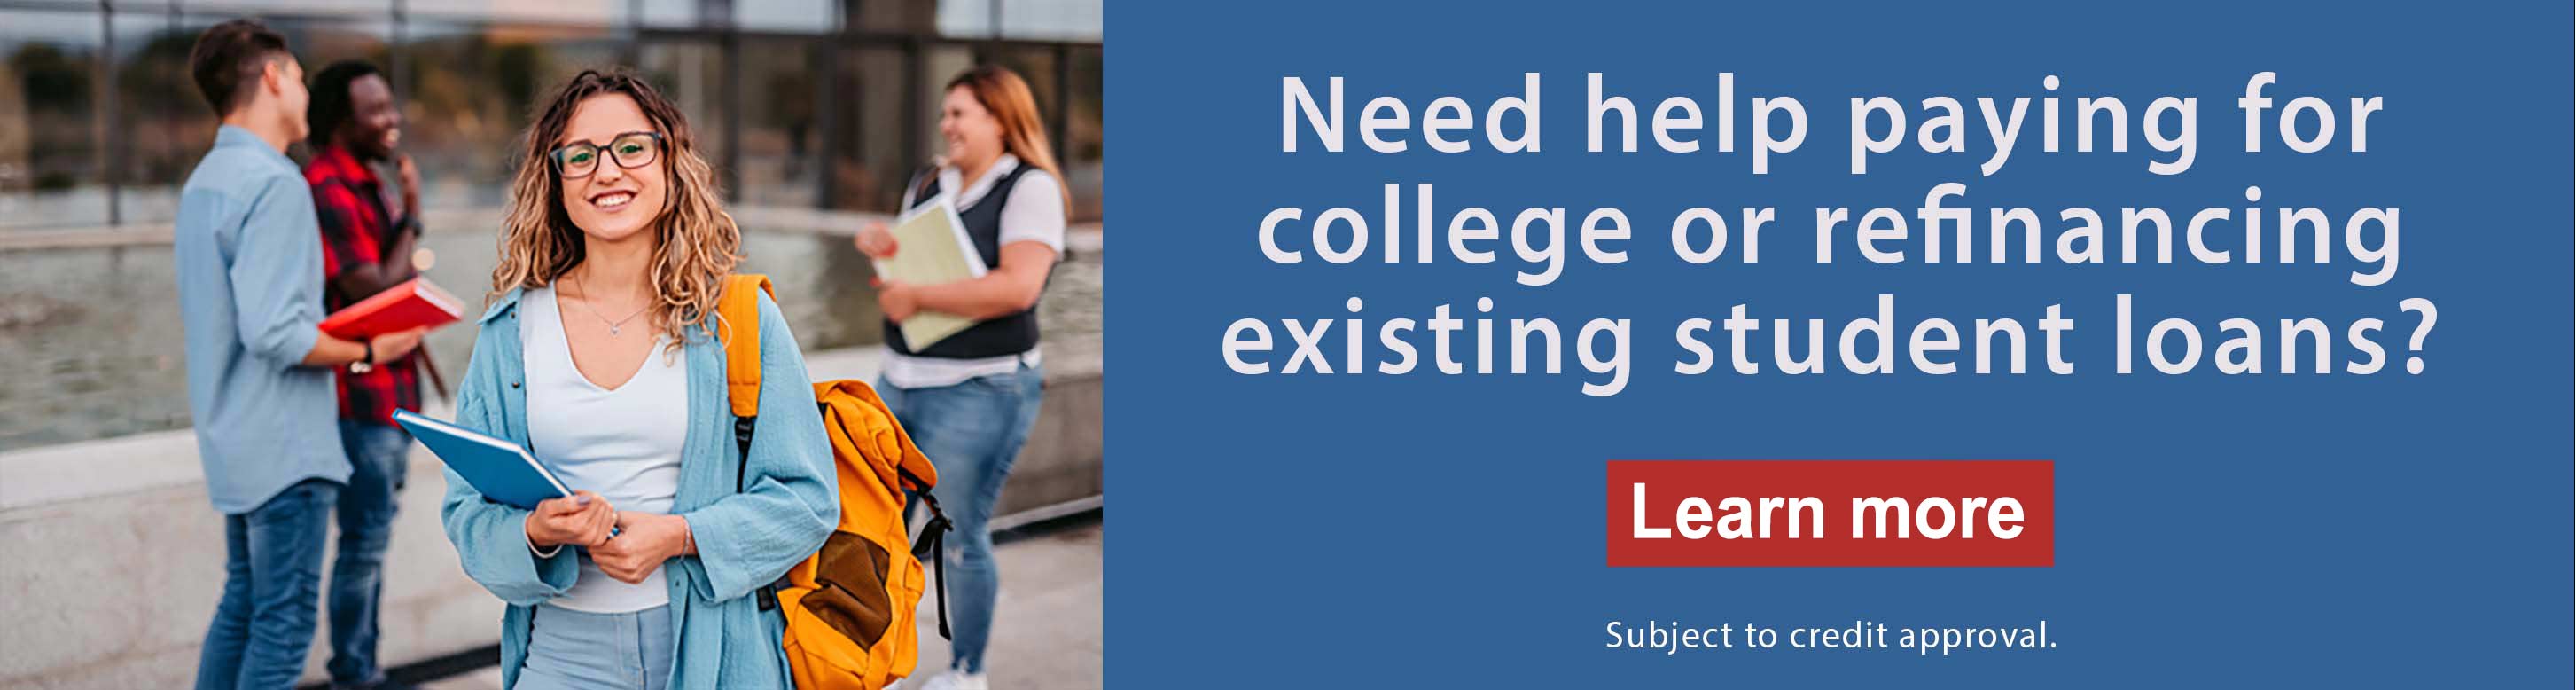 Need help paying for college or refinancing existing student loans? Learn more subject to credit approval